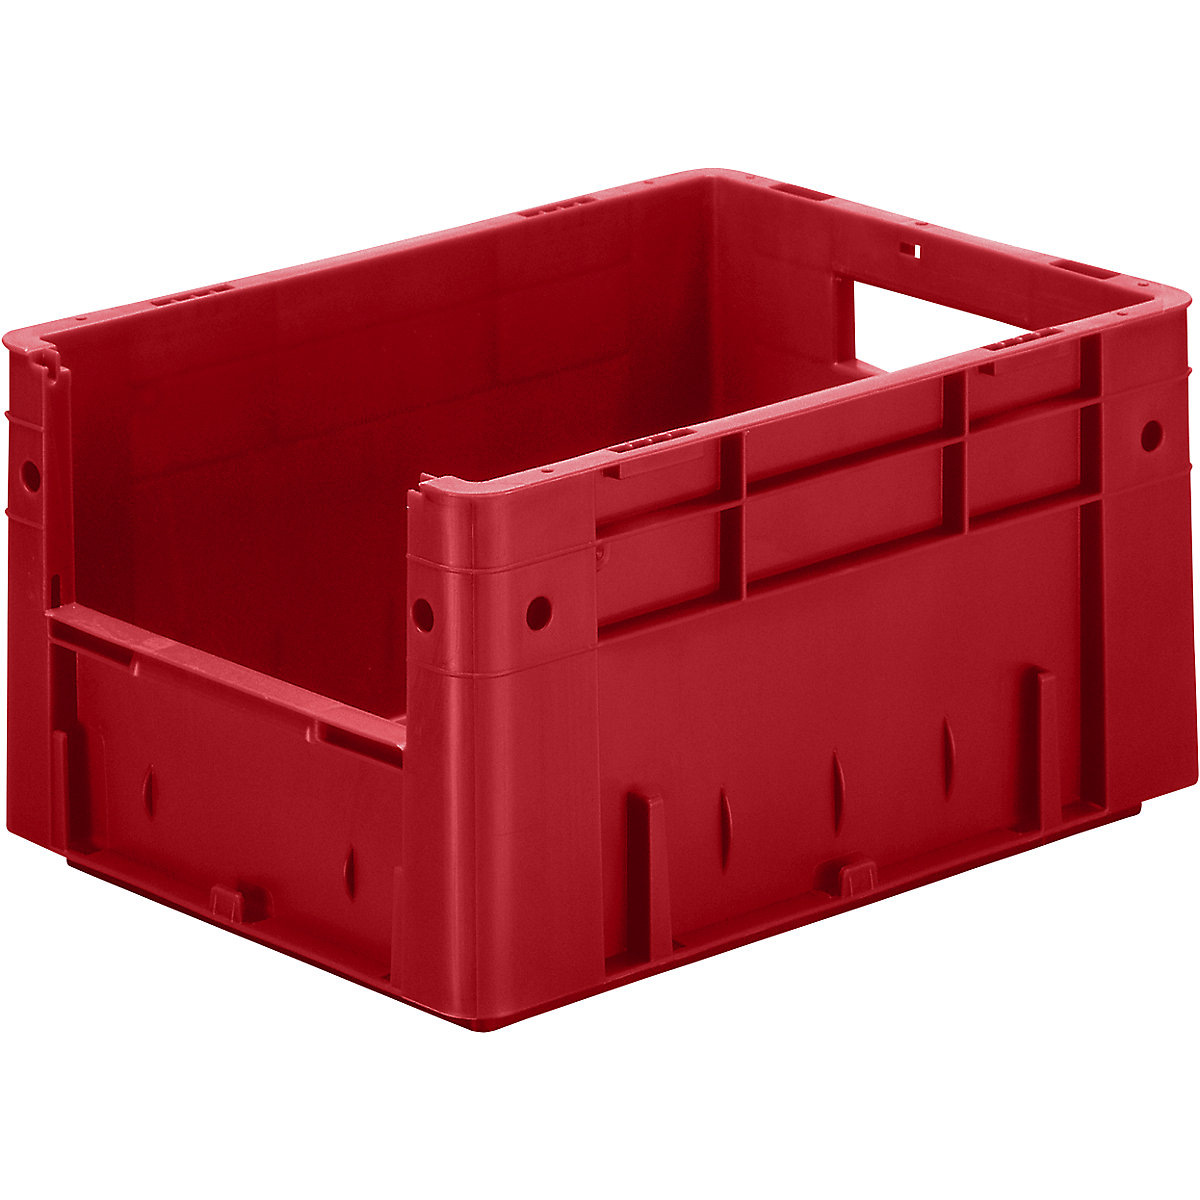 Euro stacking container, capacity 17.5 l, LxWxH 400 x 300 x 210 mm, pack of 4, red-3